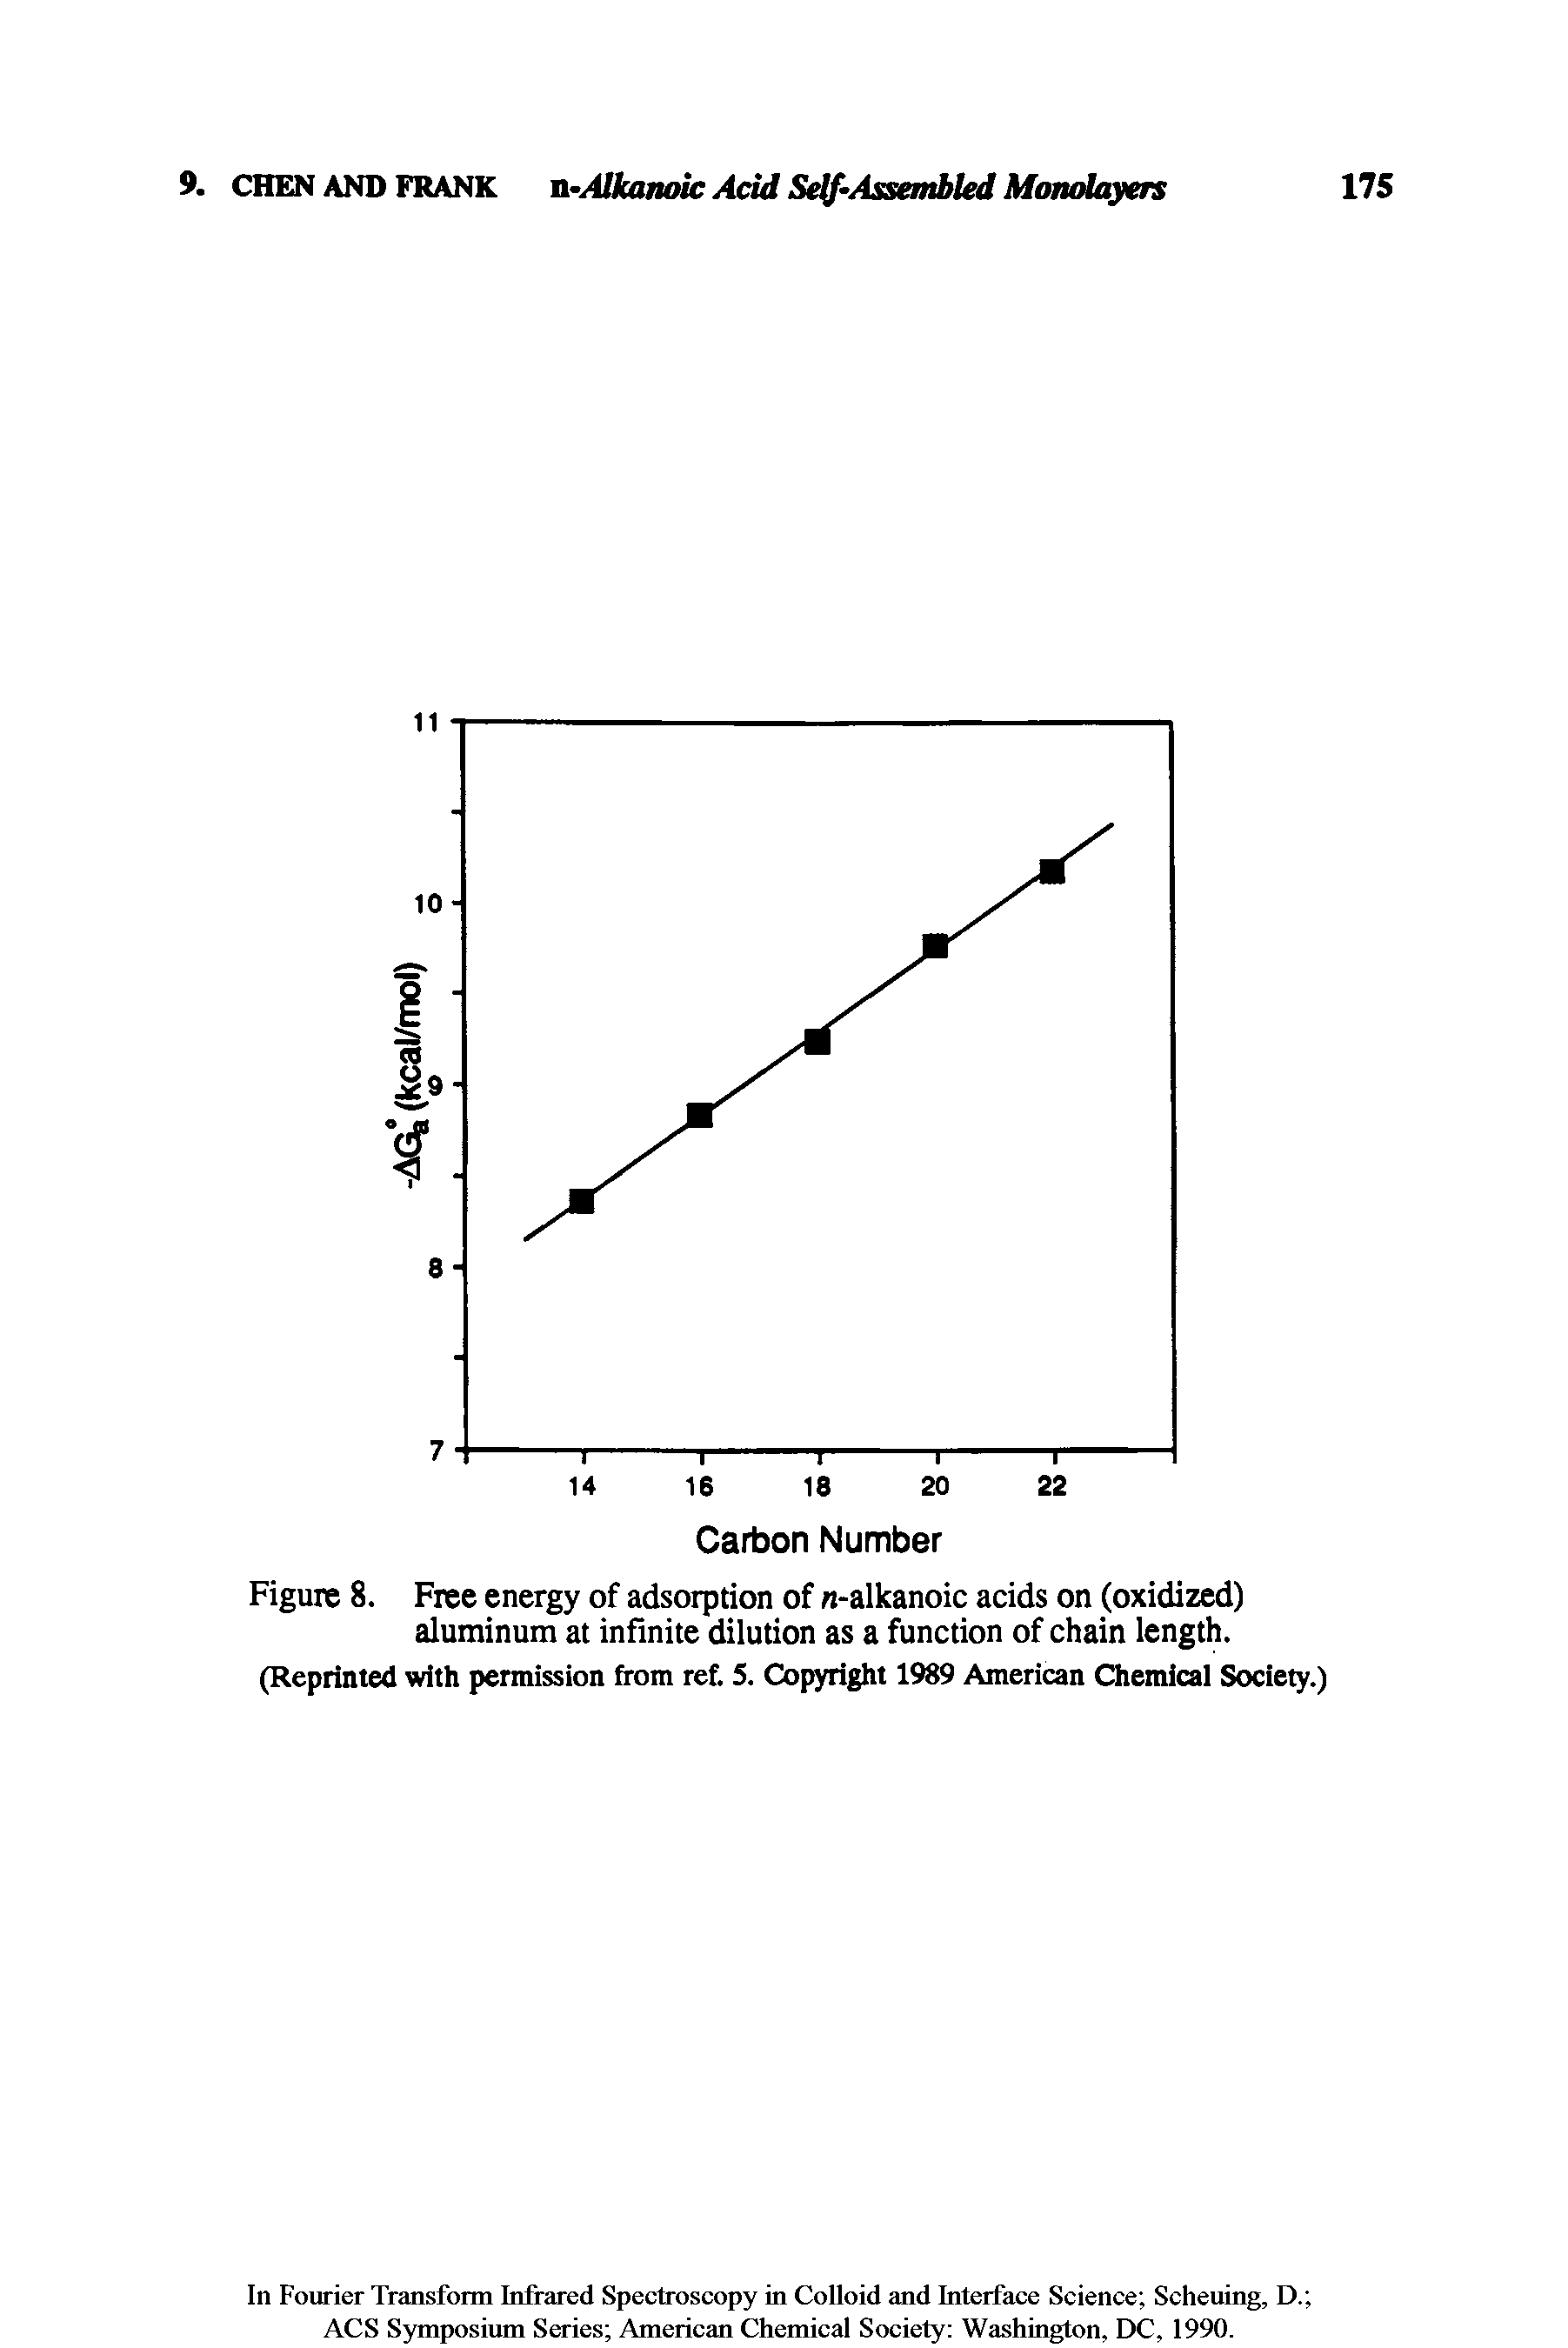 Figure 8. Free energy of adsorption of n-alkanoic acids on (oxidized) aluminum at infinite dilution as a function of chain length. (Reprinted with permission from ref. 5. Copyright 1989 American Chemical Society.)...